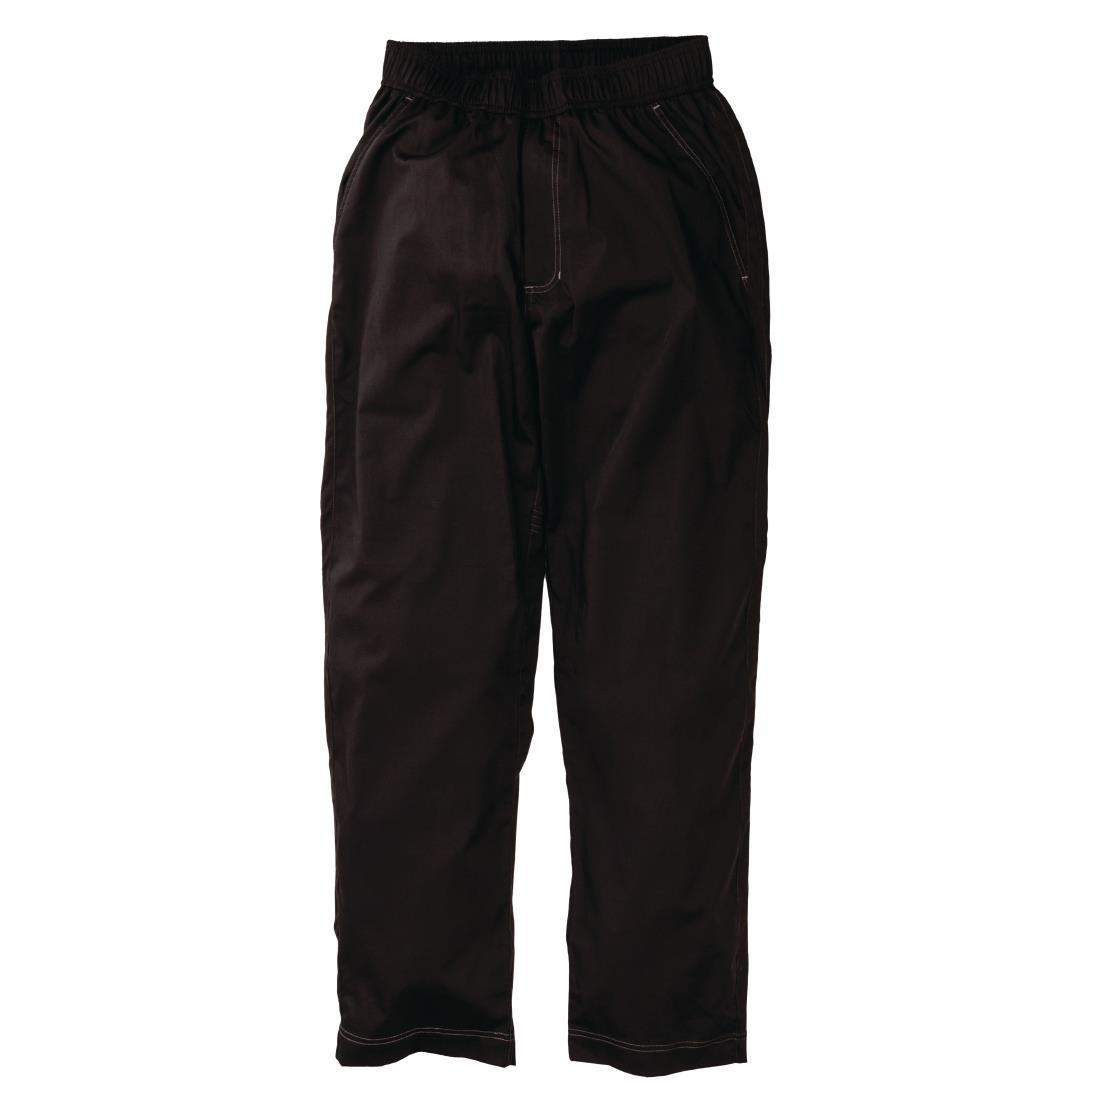 Chef Works Unisex Cool Vent Baggy Chefs Trousers Black 2XL - B187-XXL  - 3